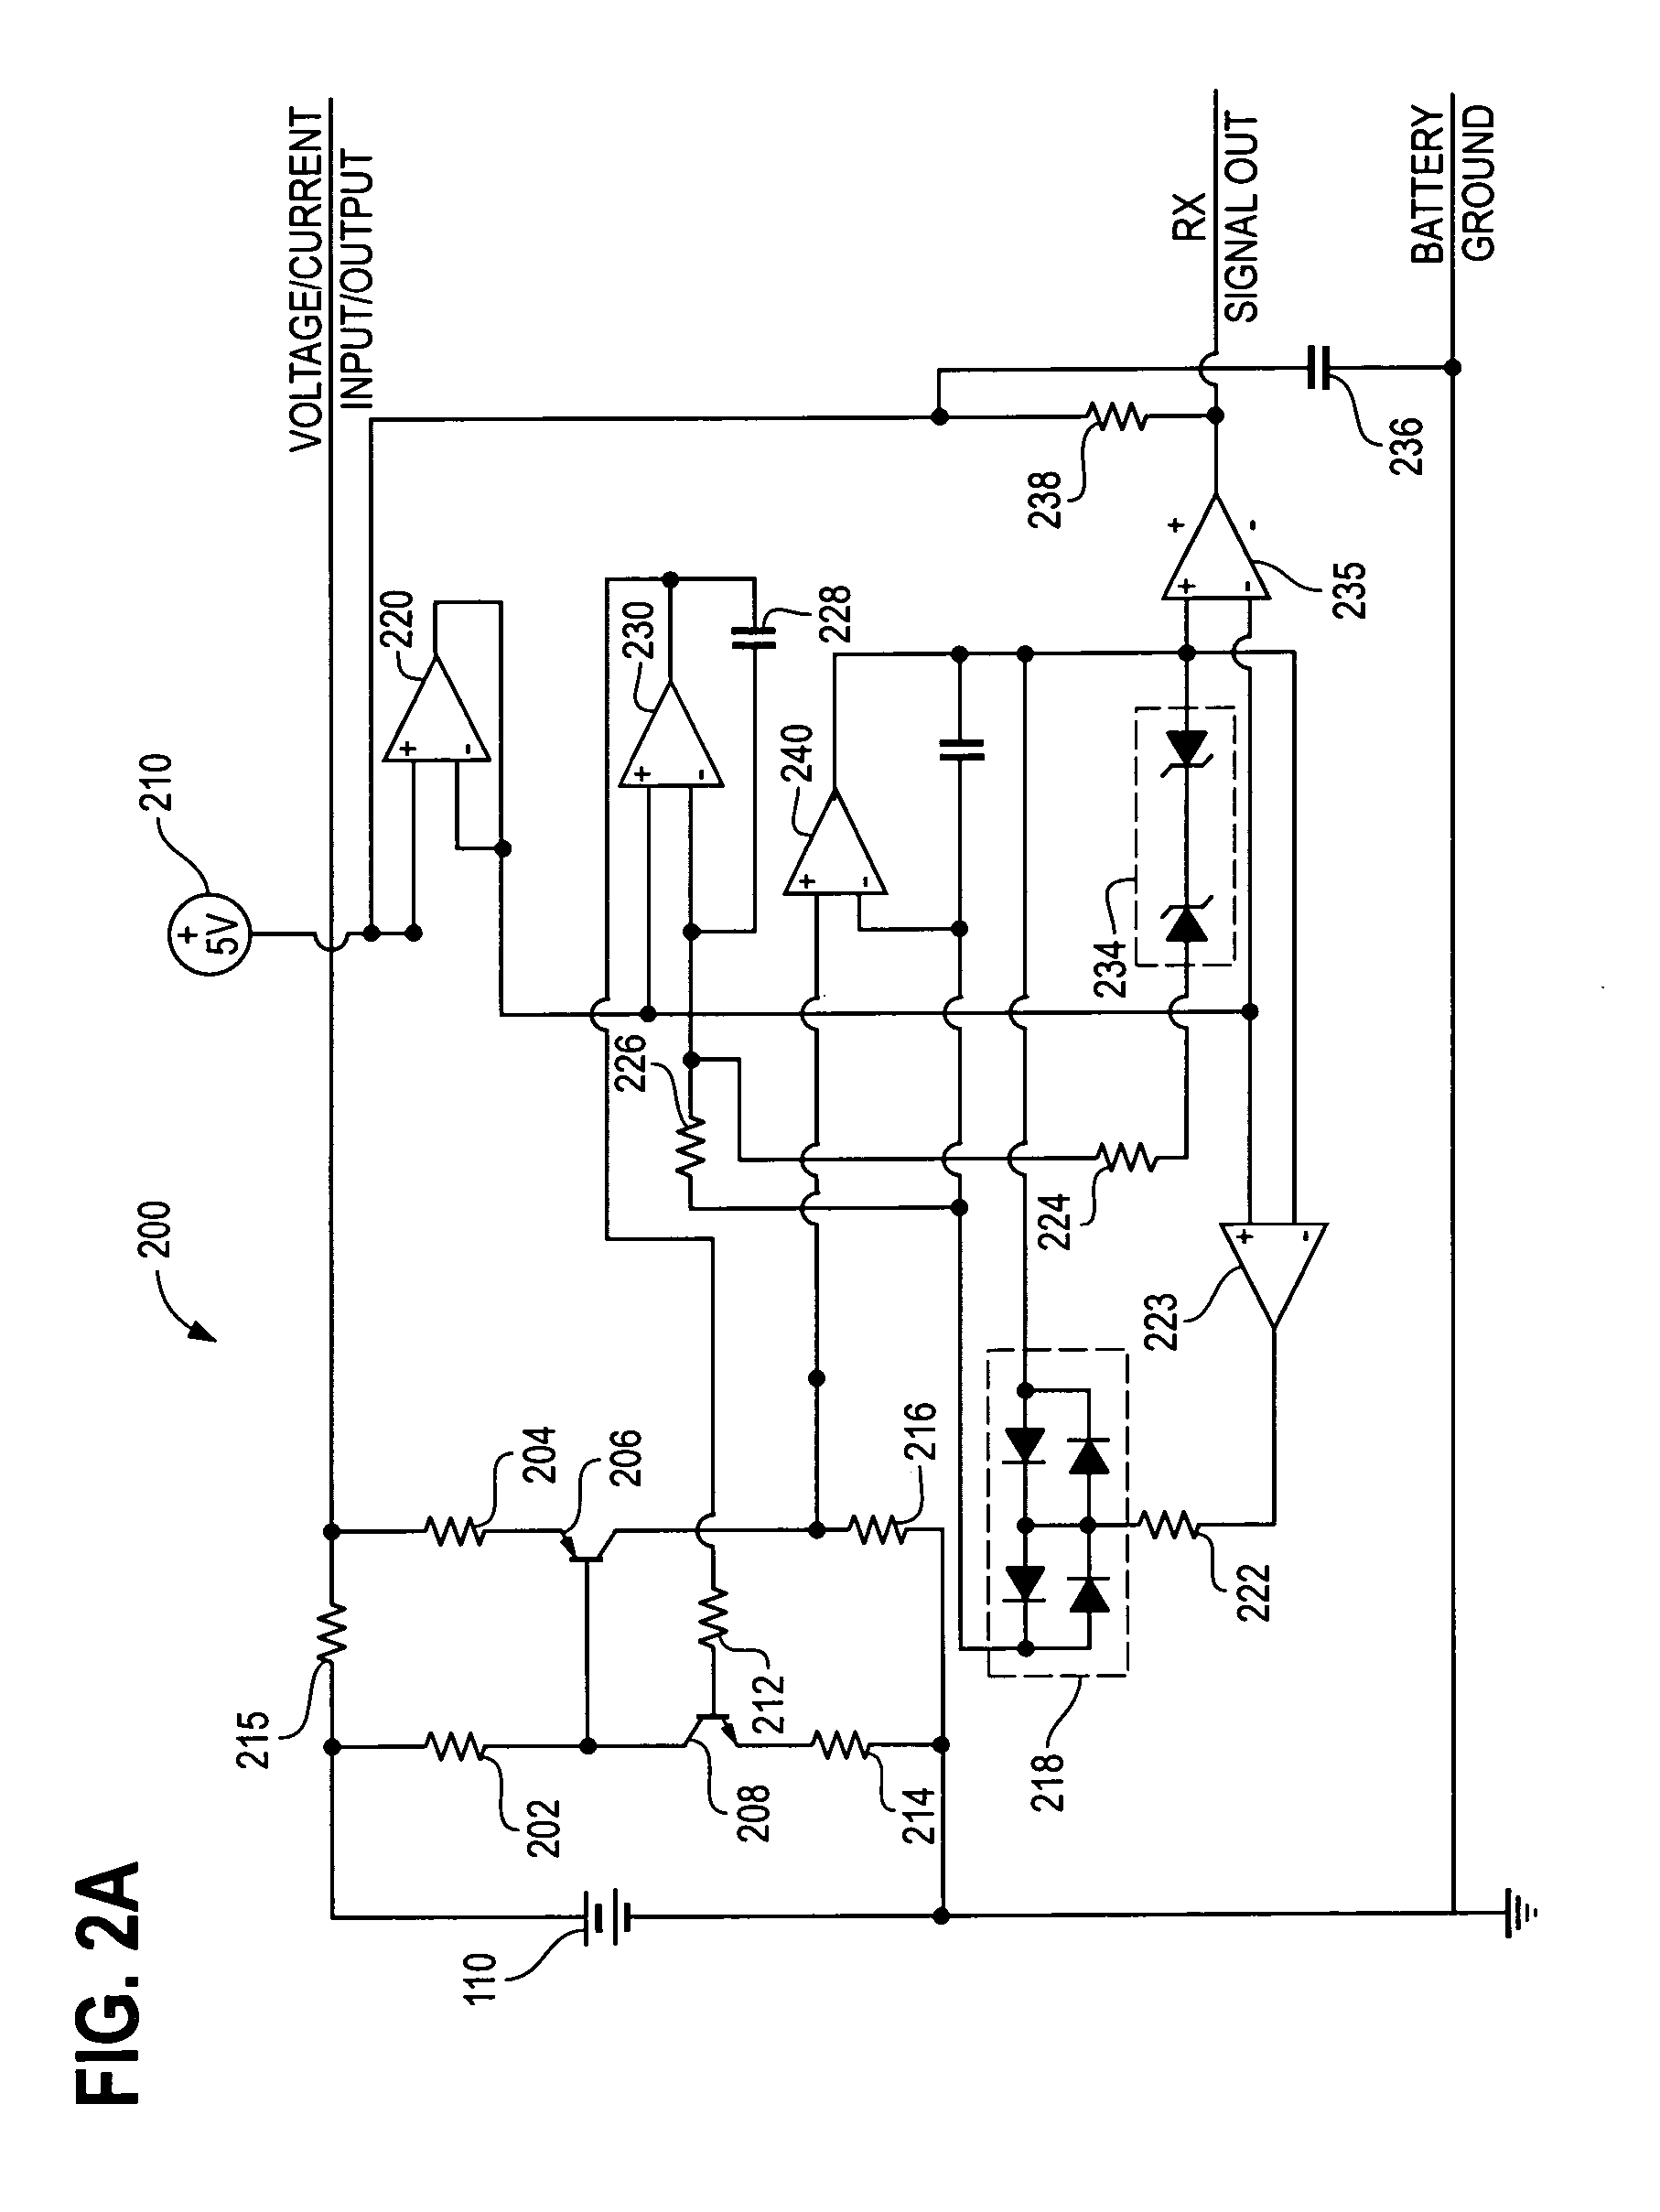 Method and system for bidirectional data and power transmission